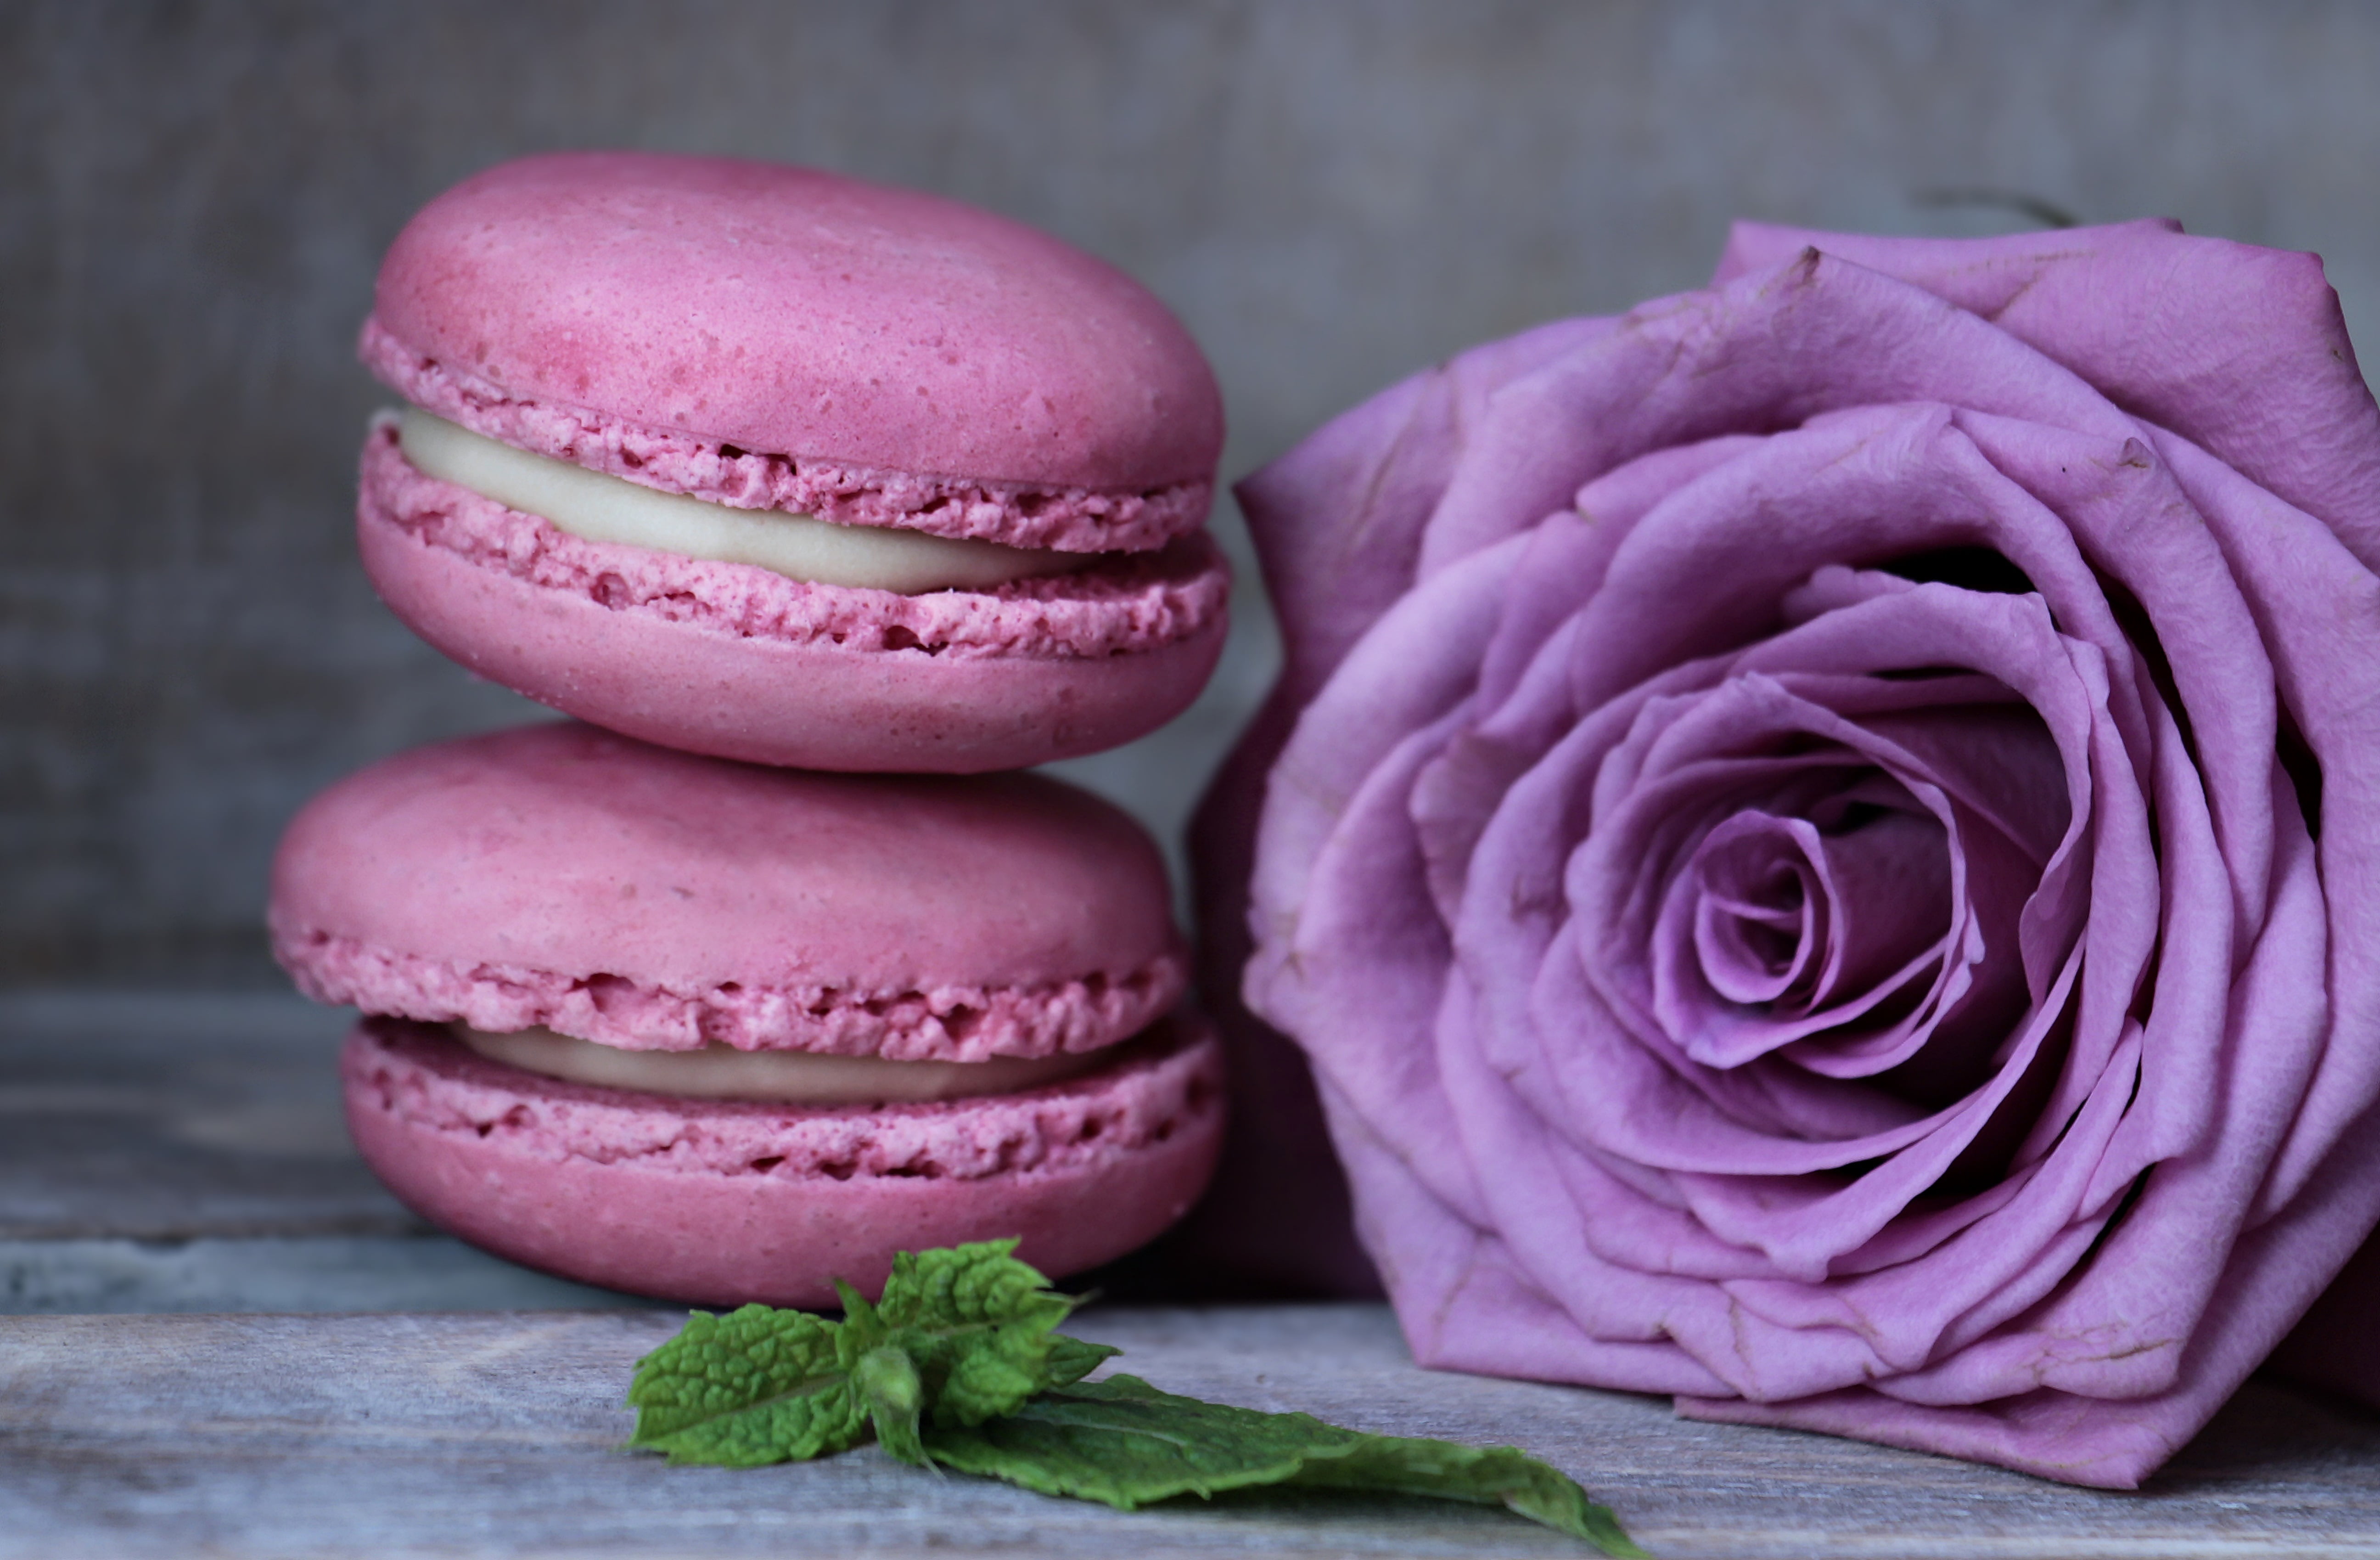 two macarons and purple rose flower, almond biscuits, pastries